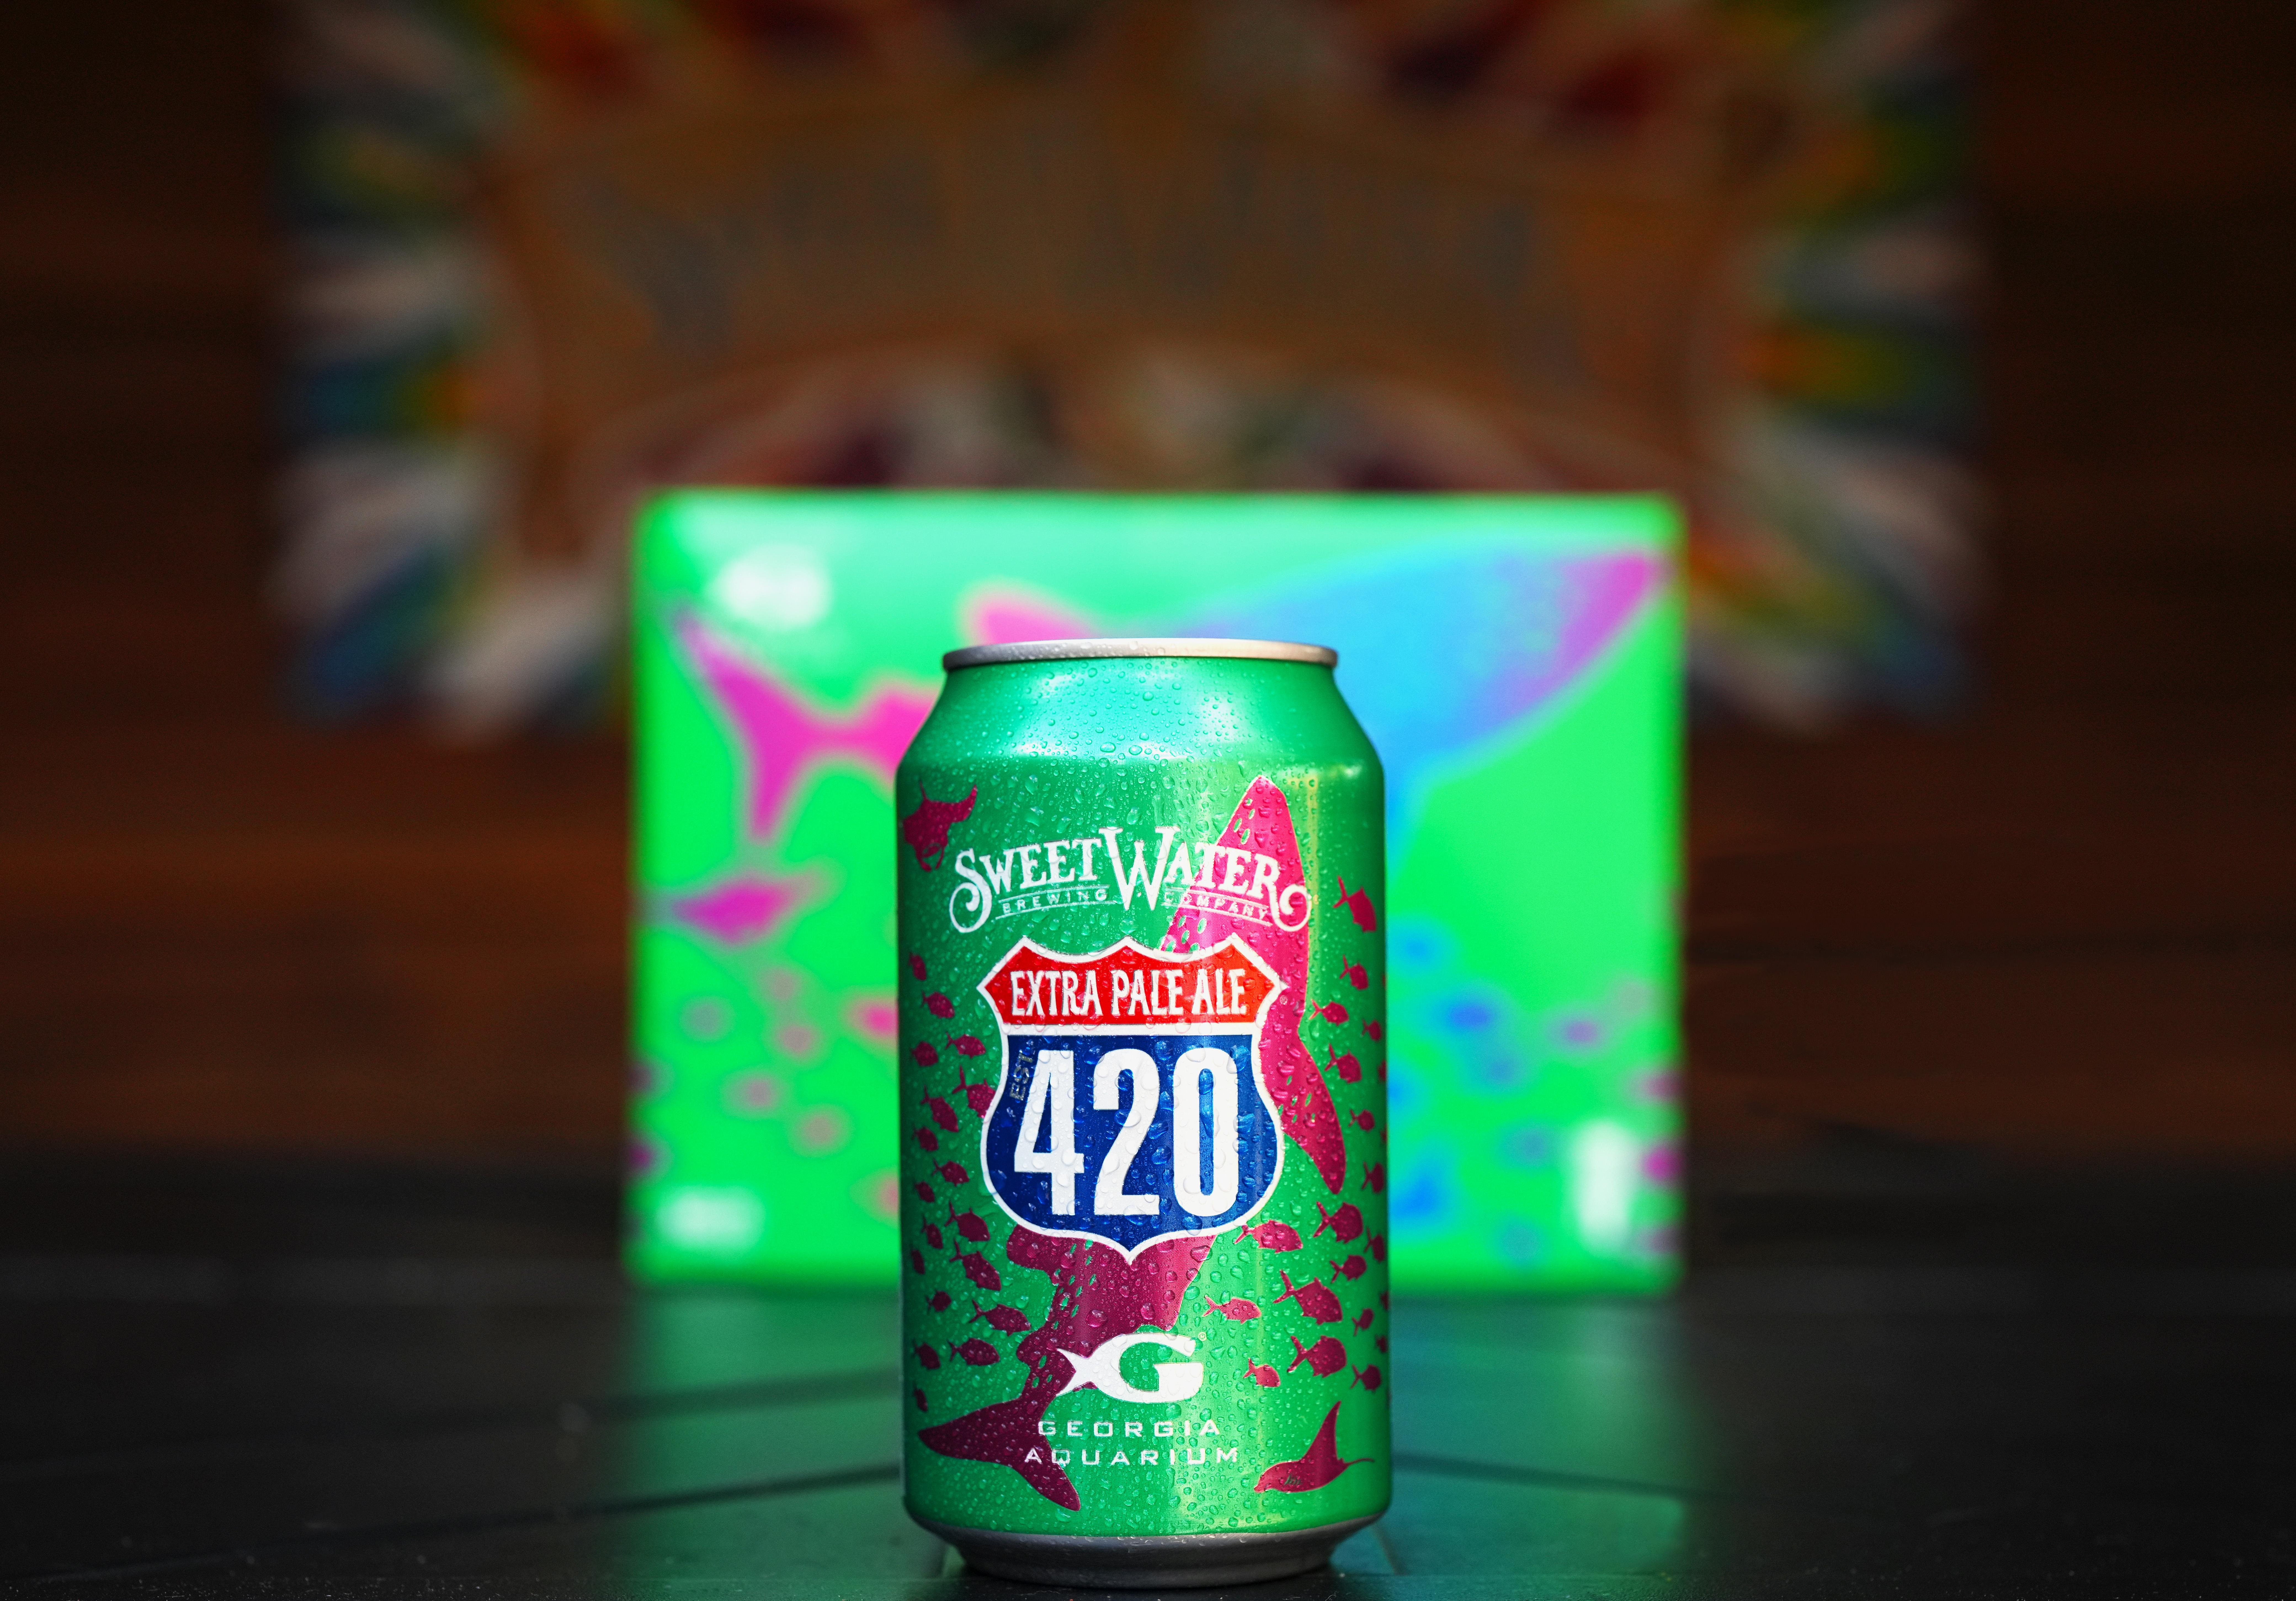 SweetWater Launches Special Edition 420 IPA in Partnership with Georgia Aquarium